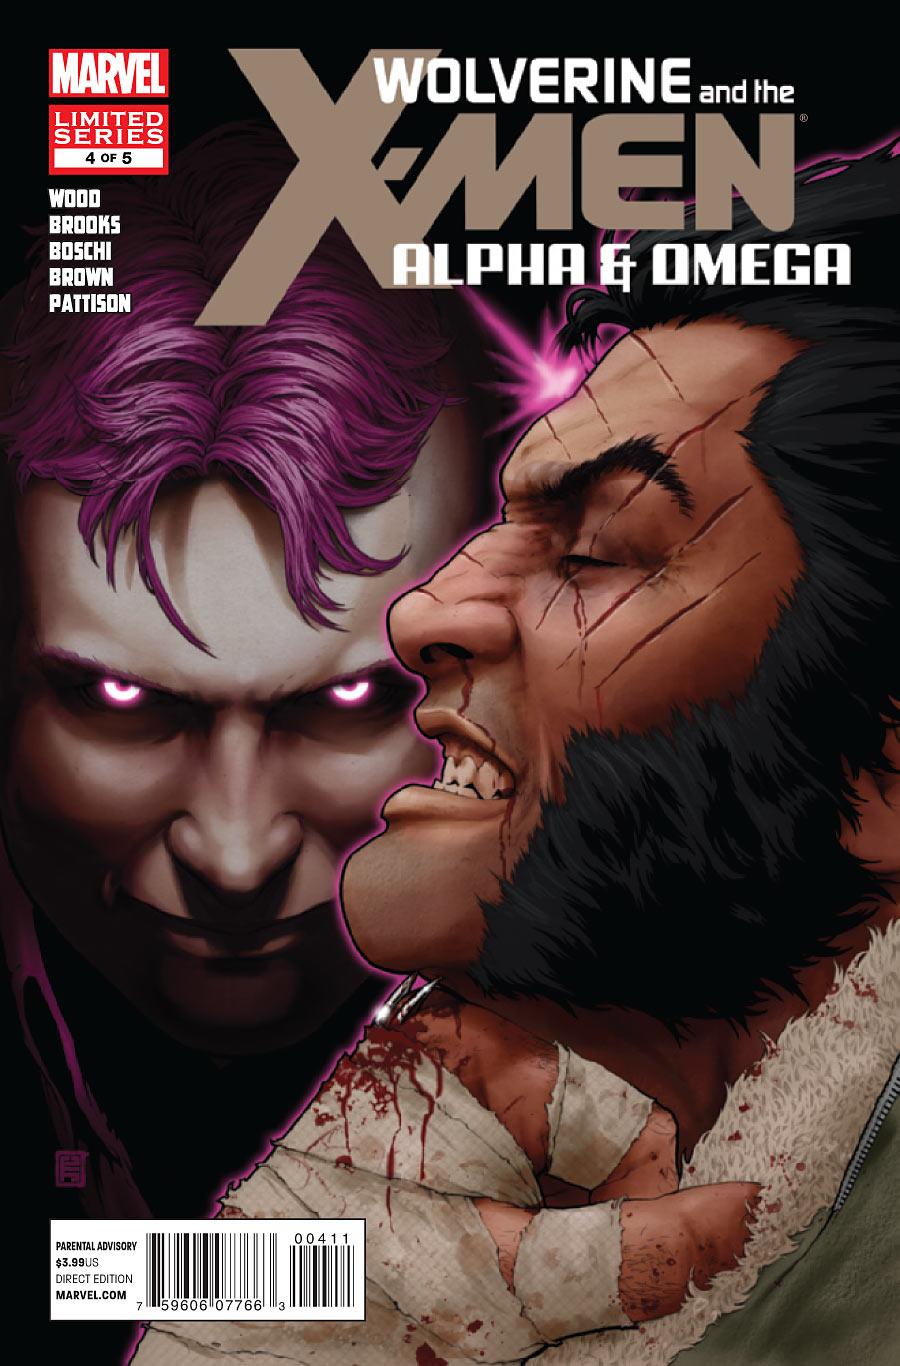 Wolverine and the X-Men: Alpha & Omega Vol. 1 #4